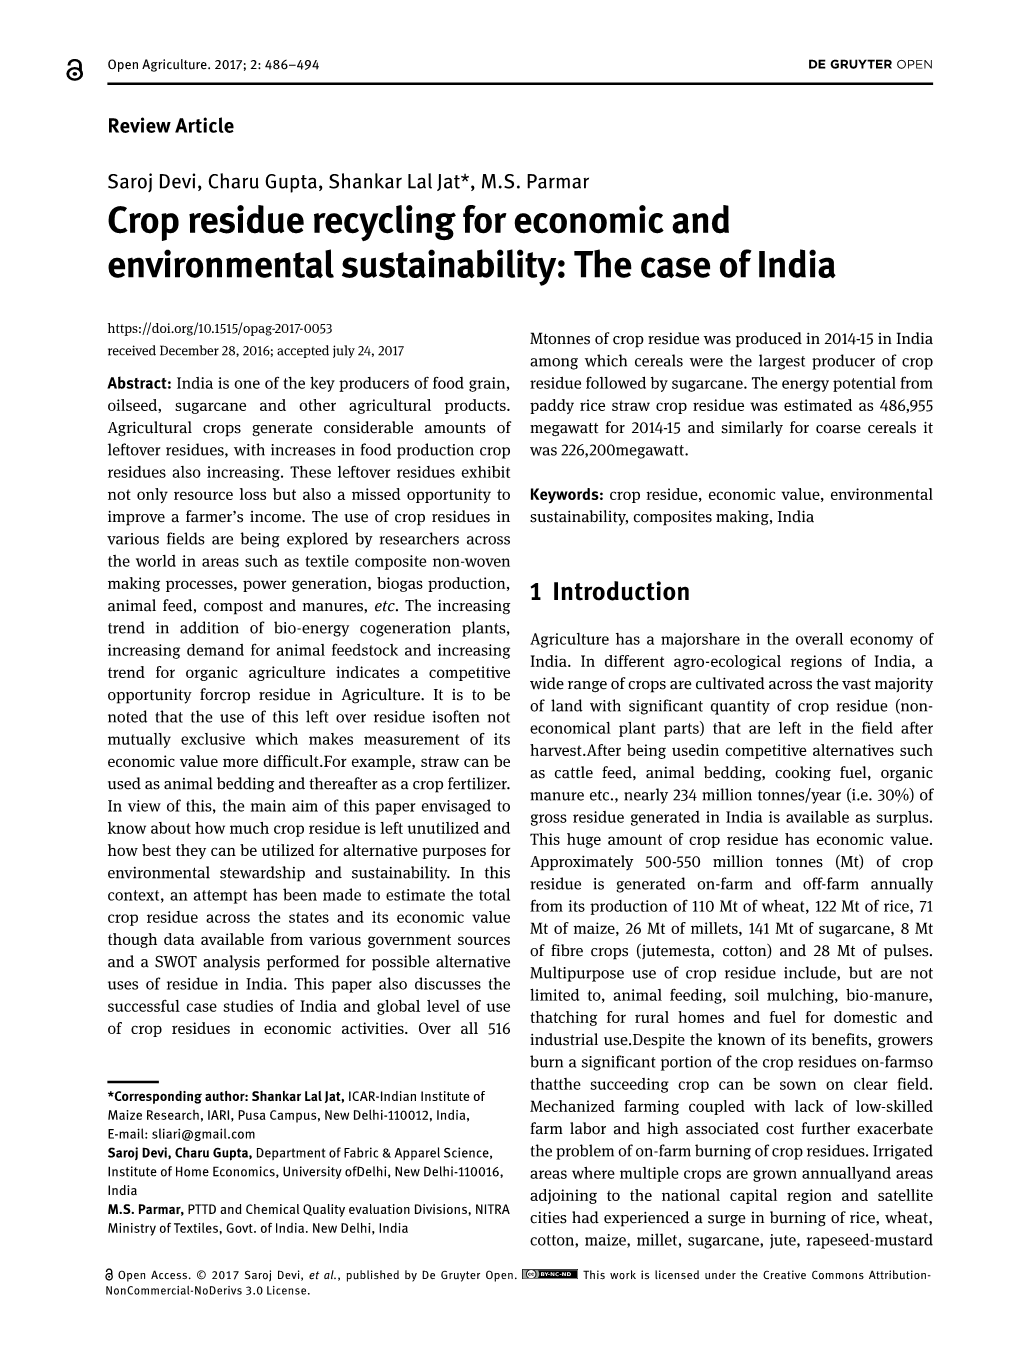 Crop Residue Recycling for Economic and Environmental Sustainability